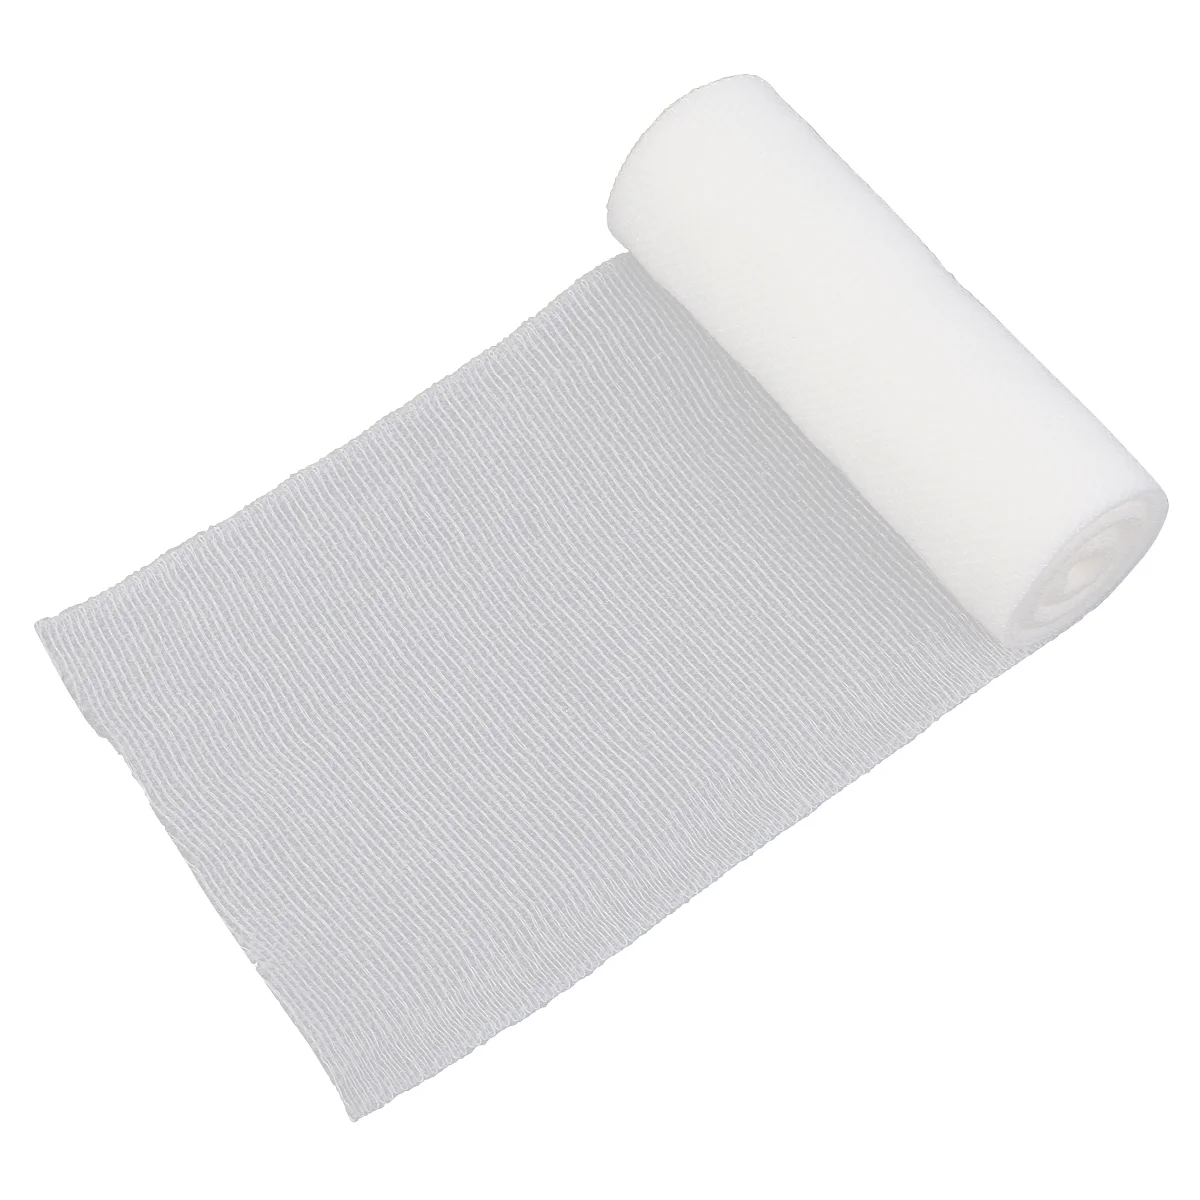 Sterile Gauze Roll Bandage for First Aid & Sports Injury Care - Stretchy Absorbent & Disposable Cotton Tape Wrap